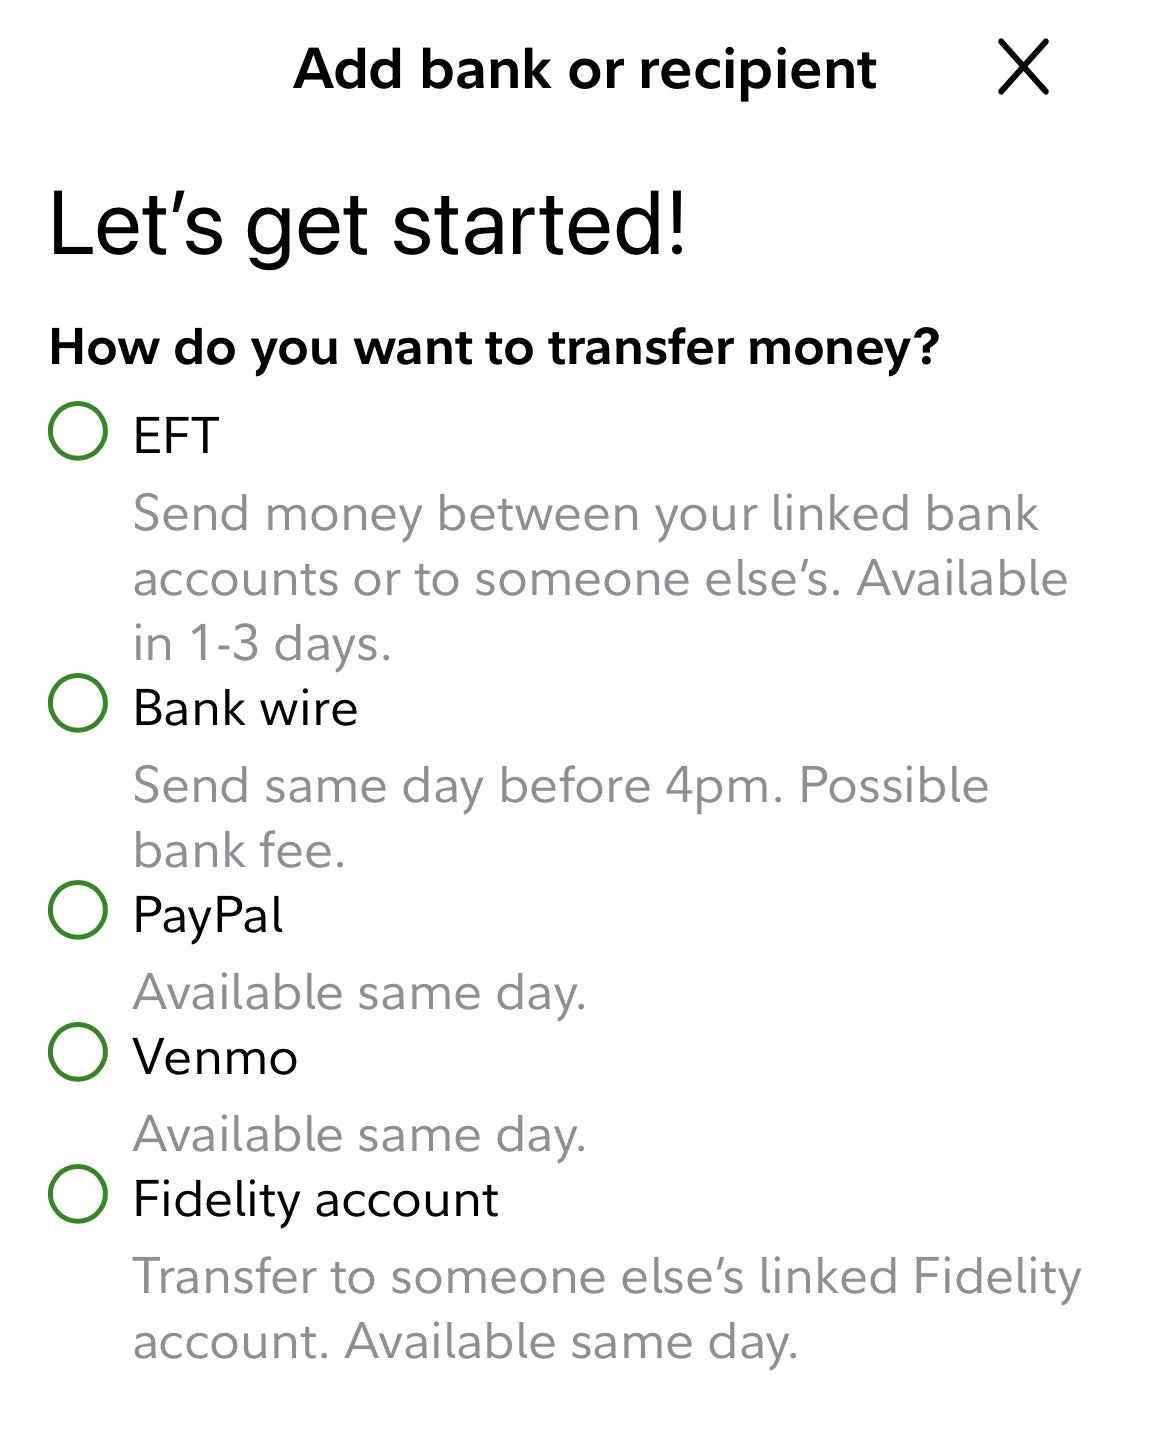 options for adding money into your fidelity account